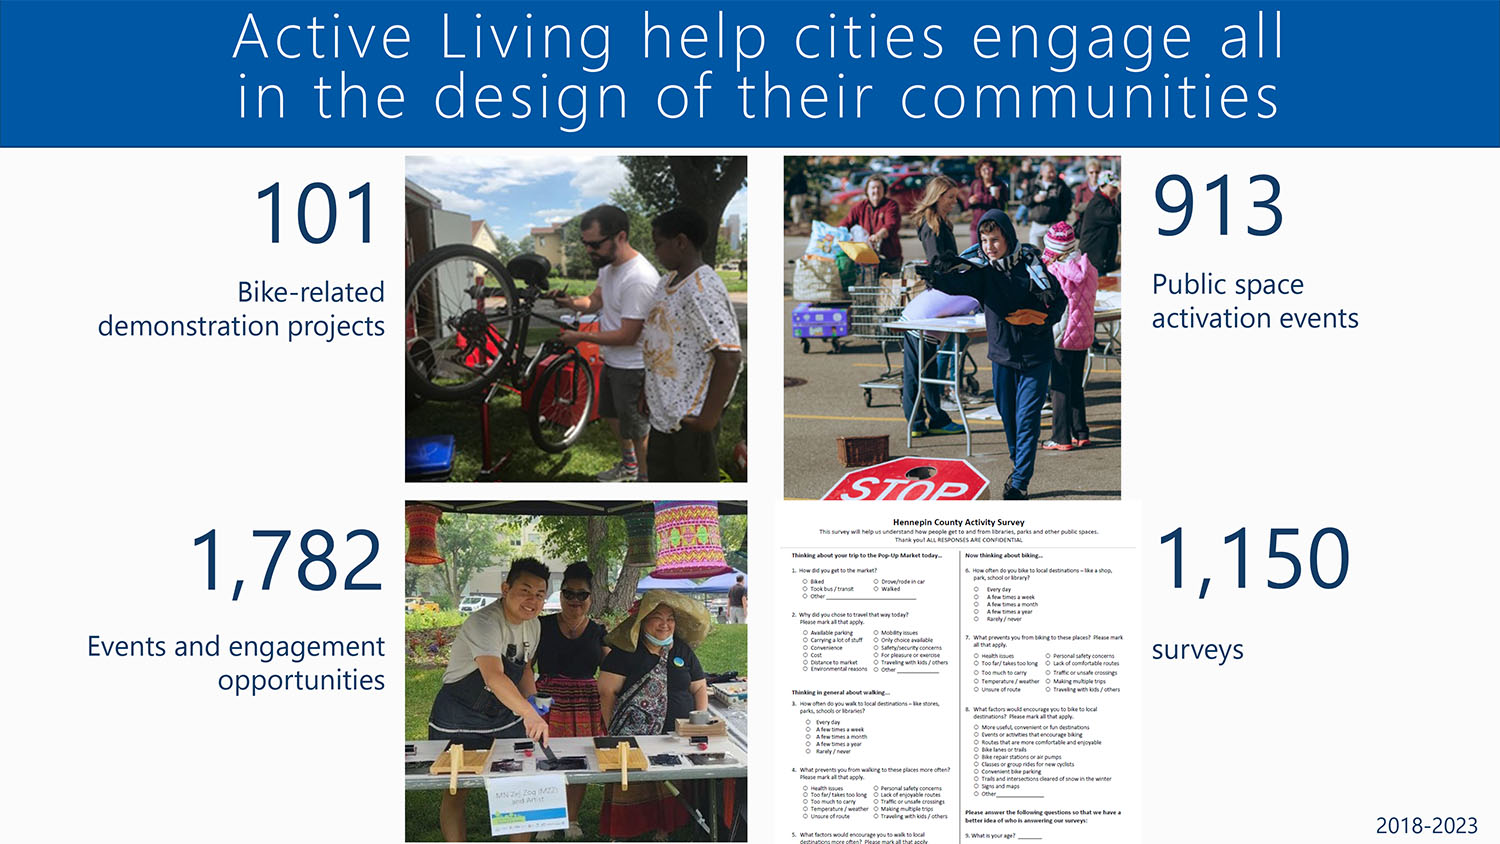 Active Living projects from 2020 to 2023.